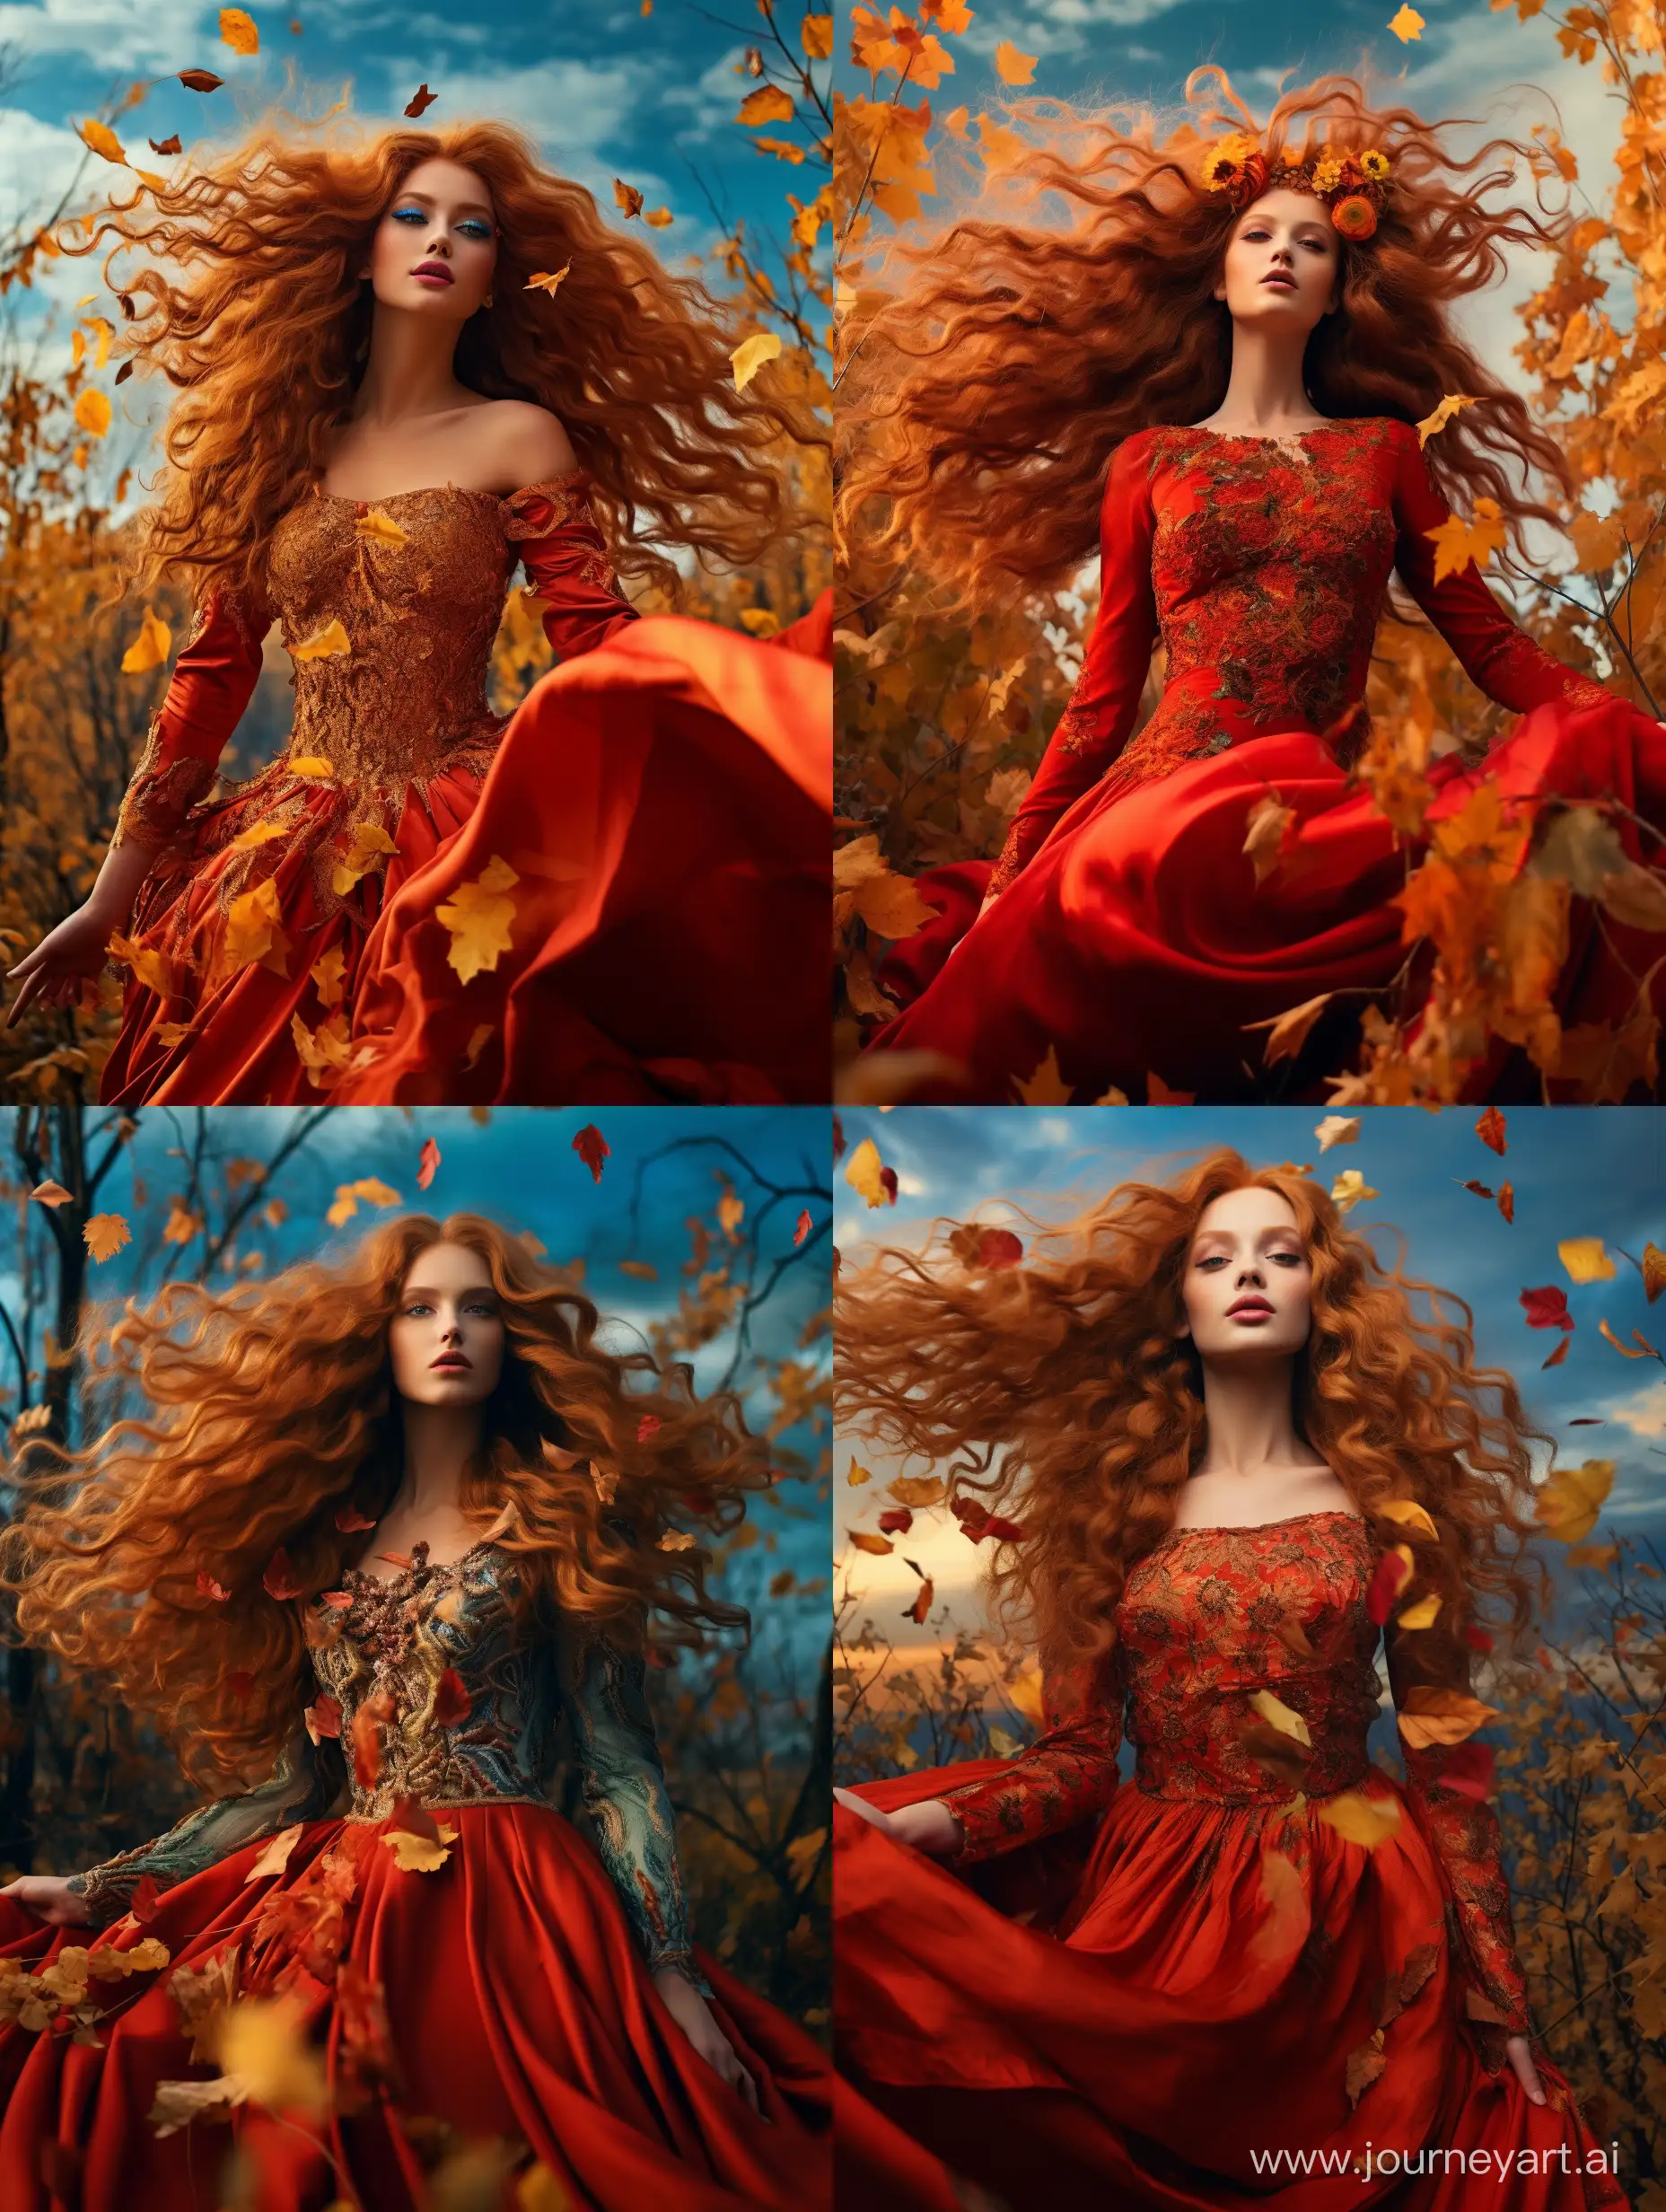 Enchanting-Autumn-Queen-with-Red-Curly-Hair-in-Leaf-Dress